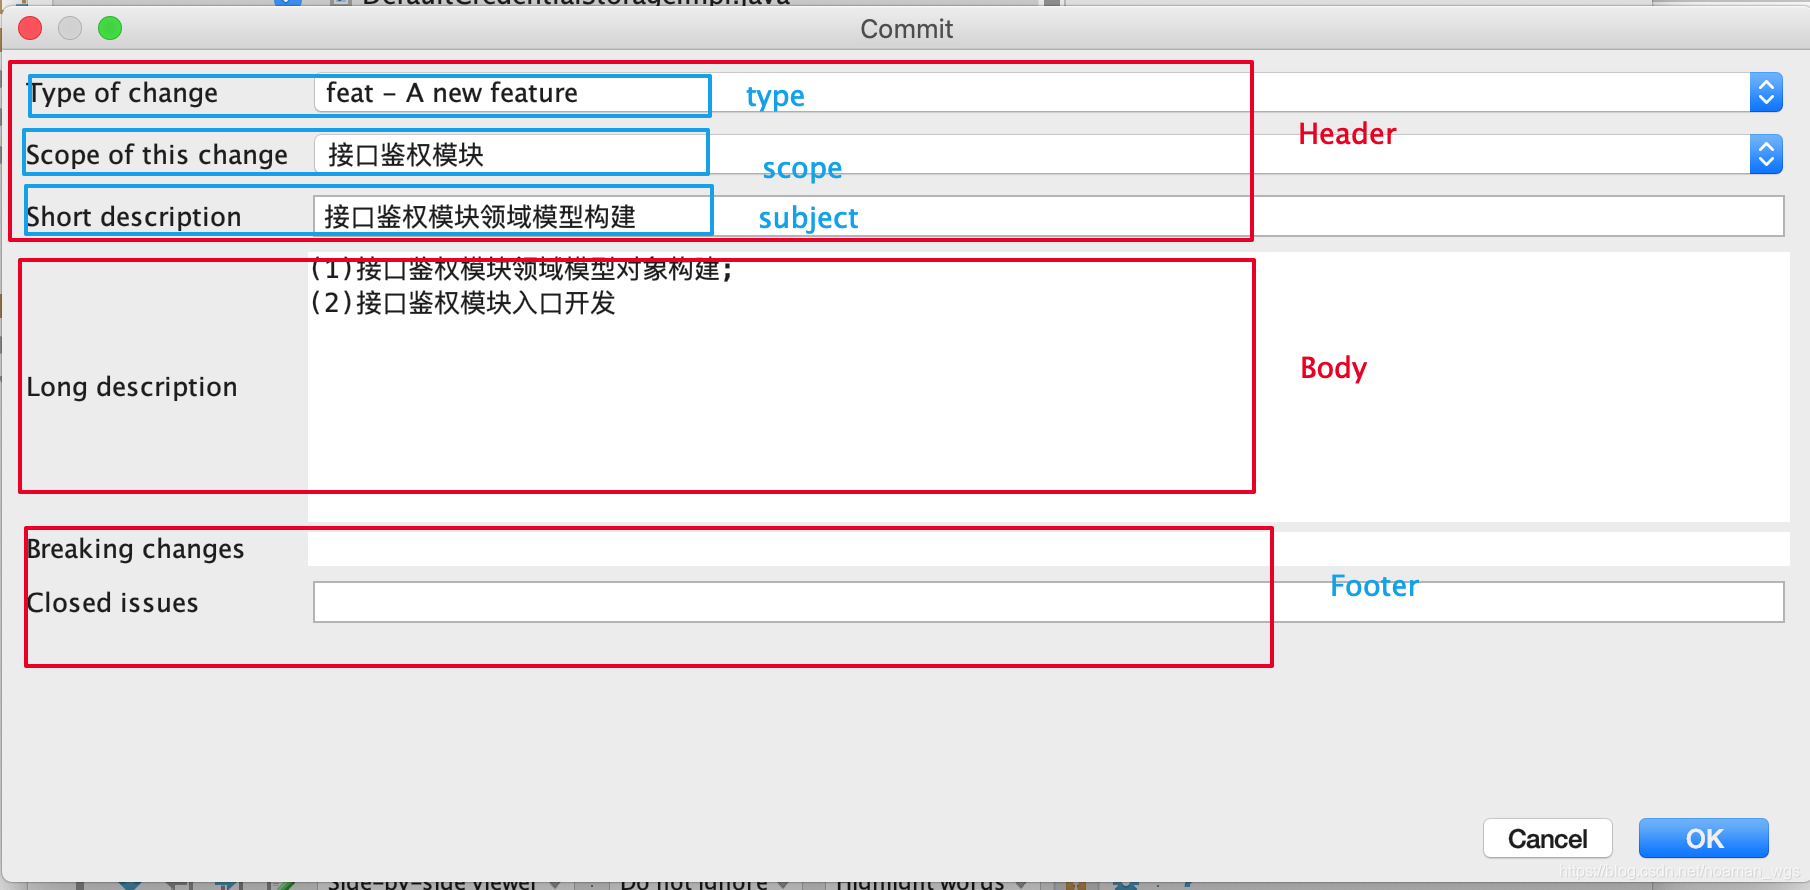 [External link image transfer failed. The source site may have an anti-leech link mechanism. It is recommended to save the image and upload it directly (img-lQ6IVwbM-1575635173934)(/Users/wanggenshen/Library/Application%20Support/typora-user-images/image- 20191206202411883.png)]